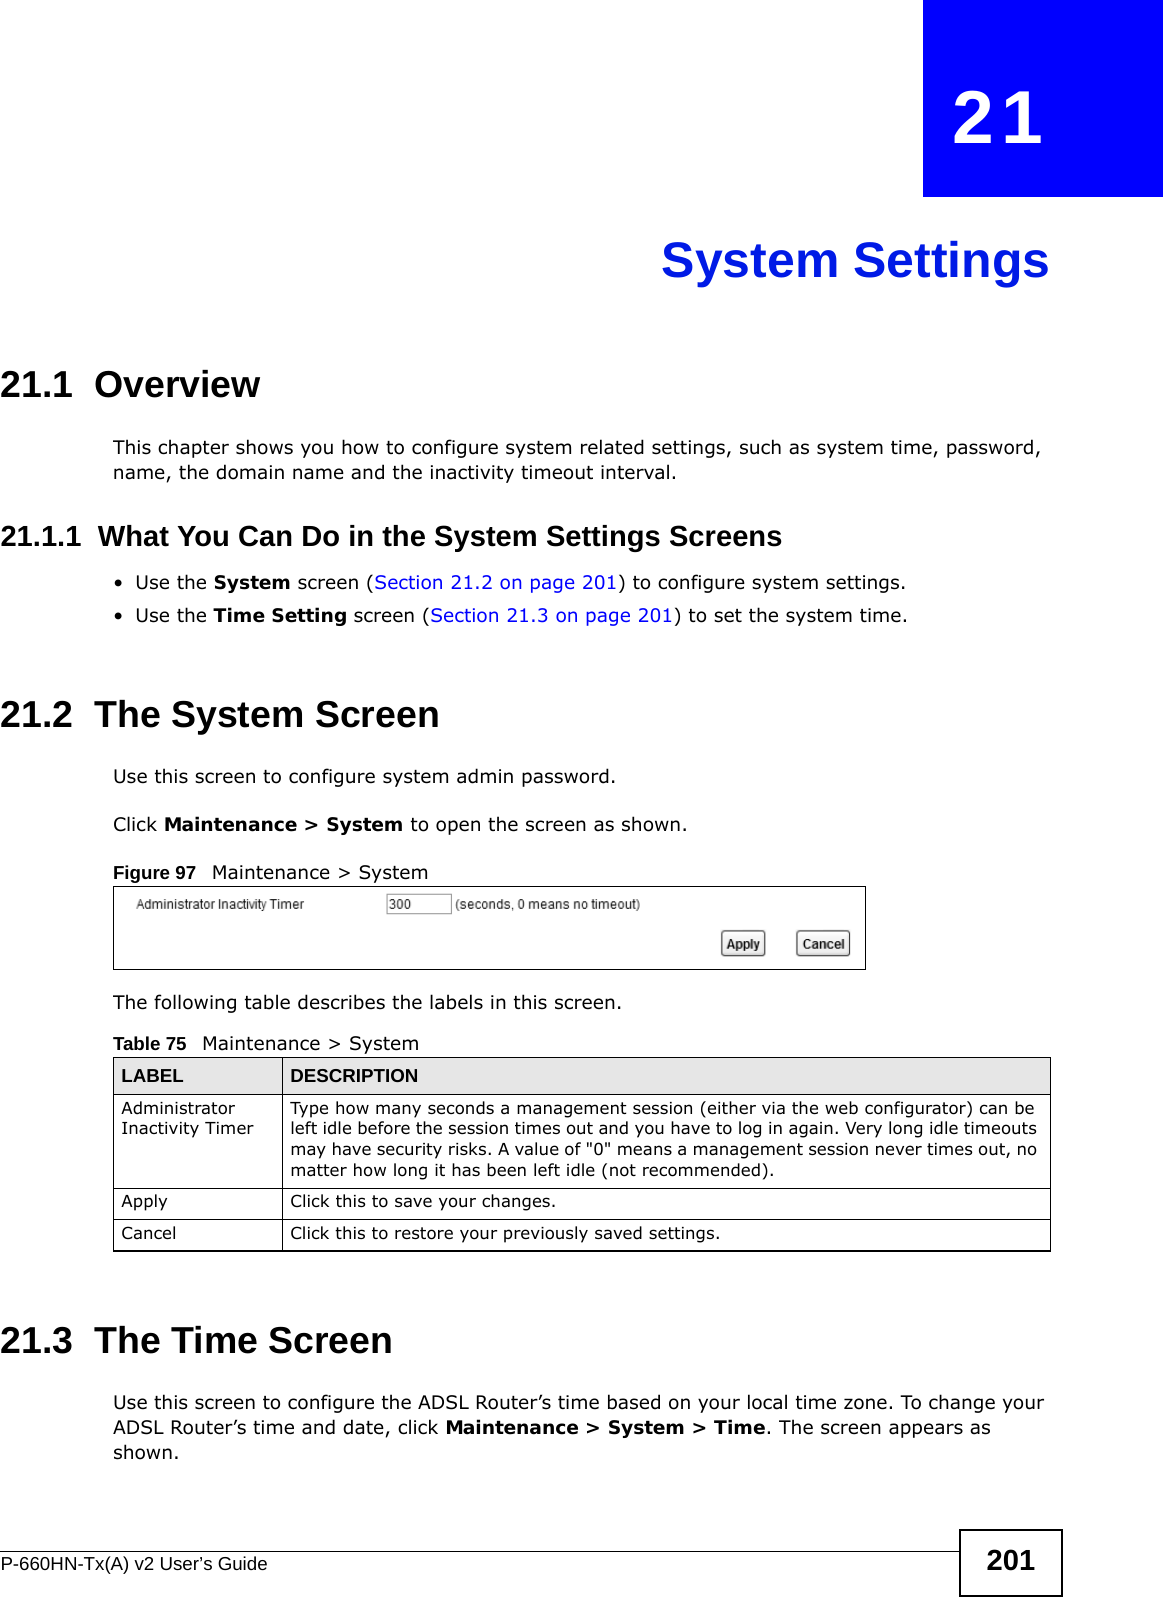 P-660HN-Tx(A) v2 User’s Guide 201CHAPTER   21System Settings21.1  OverviewThis chapter shows you how to configure system related settings, such as system time, password, name, the domain name and the inactivity timeout interval.    21.1.1  What You Can Do in the System Settings Screens•Use the System screen (Section 21.2 on page 201) to configure system settings.•Use the Time Setting screen (Section 21.3 on page 201) to set the system time.21.2  The System ScreenUse this screen to configure system admin password.Click Maintenance &gt; System to open the screen as shown. Figure 97   Maintenance &gt; SystemThe following table describes the labels in this screen. 21.3  The Time Screen Use this screen to configure the ADSL Router’s time based on your local time zone. To change your ADSL Router’s time and date, click Maintenance &gt; System &gt; Time. The screen appears as shown.Table 75   Maintenance &gt; SystemLABEL DESCRIPTIONAdministrator Inactivity TimerType how many seconds a management session (either via the web configurator) can be left idle before the session times out and you have to log in again. Very long idle timeouts may have security risks. A value of &quot;0&quot; means a management session never times out, no matter how long it has been left idle (not recommended).Apply Click this to save your changes.Cancel Click this to restore your previously saved settings.